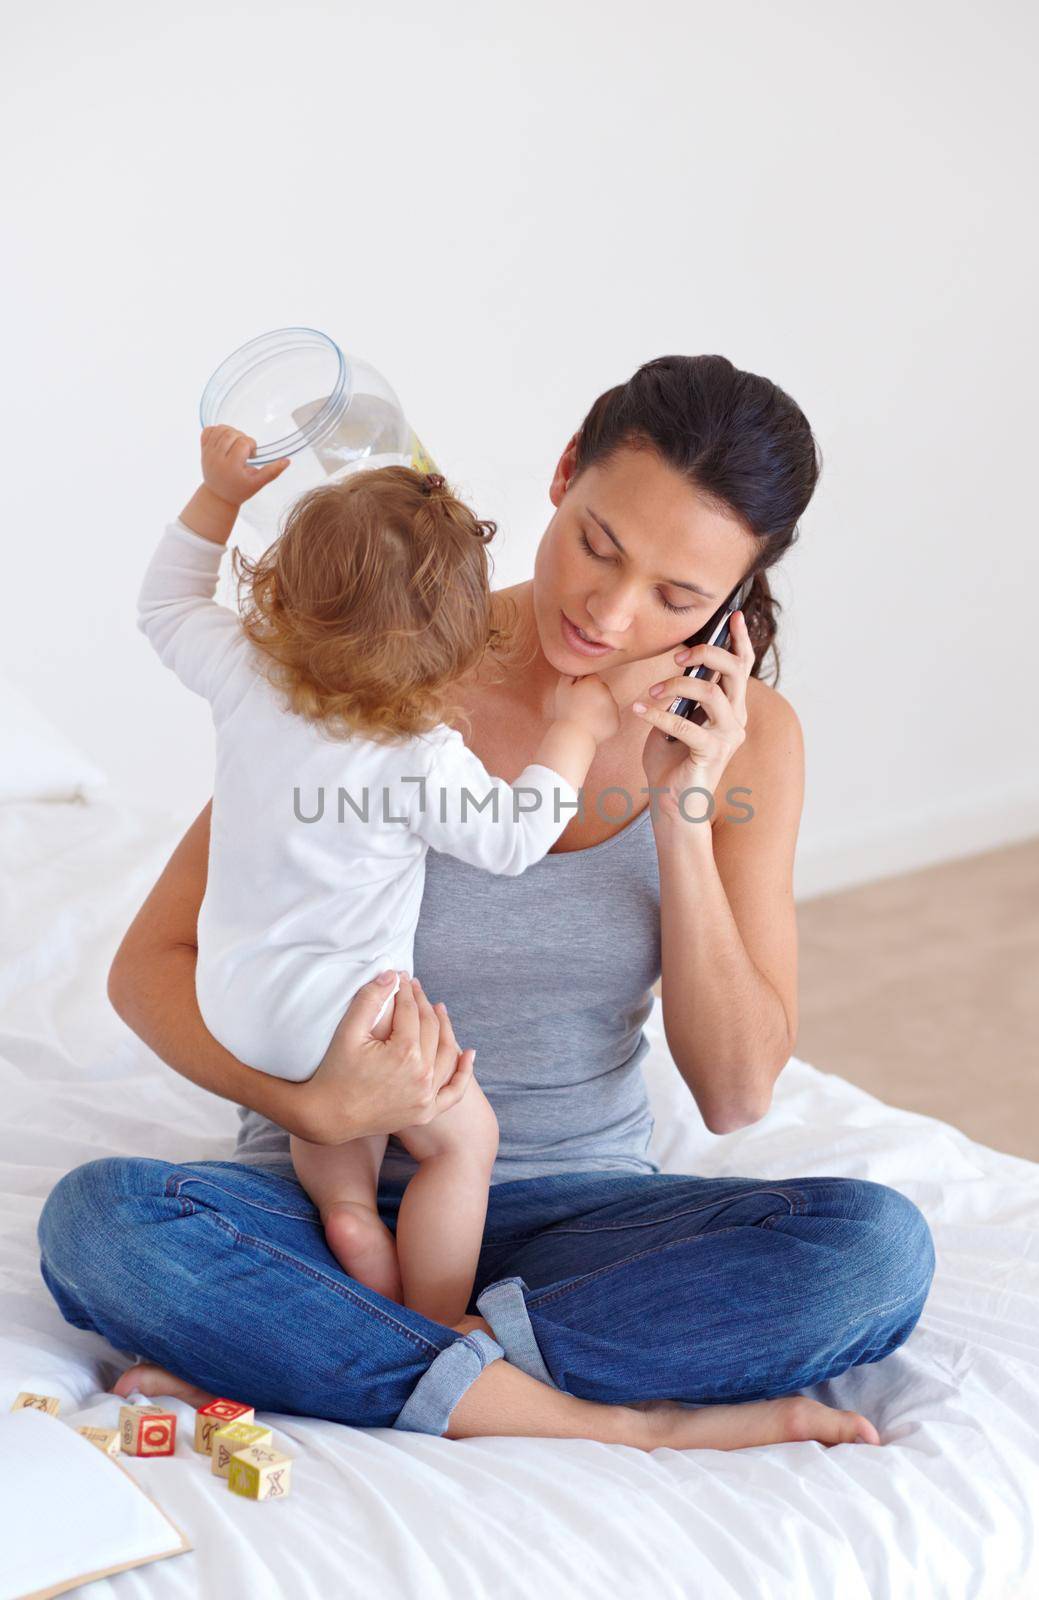 Trying to balance it all - Motherhood. a beautiful young woman and her baby at home